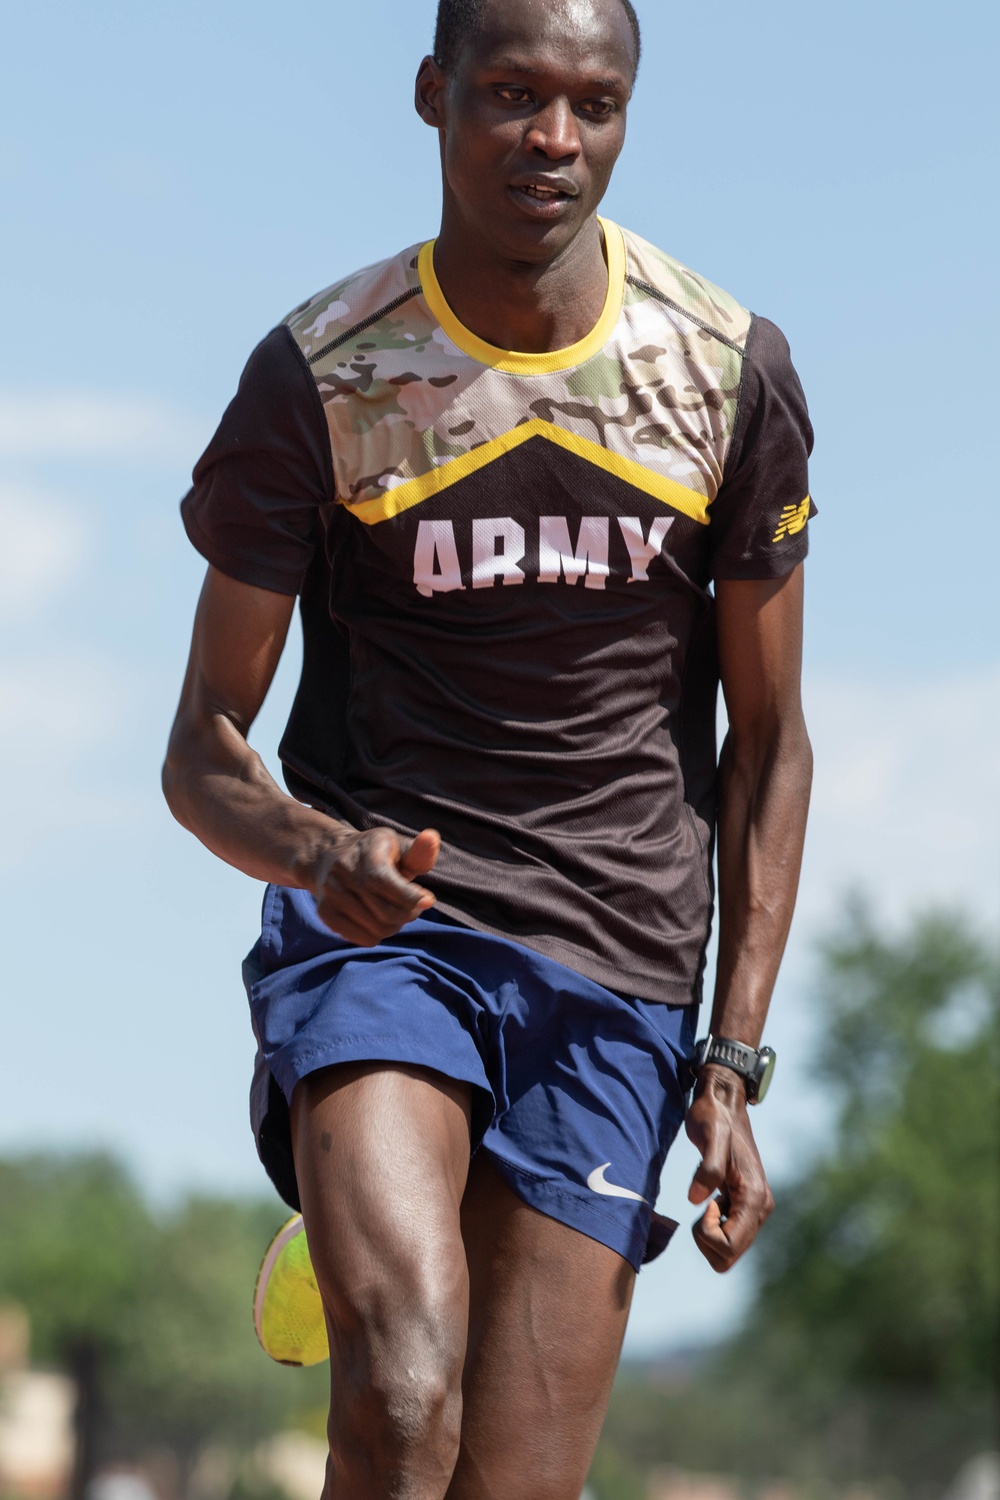 Sprinting to the finish: Army leader uses running to achieve his goals